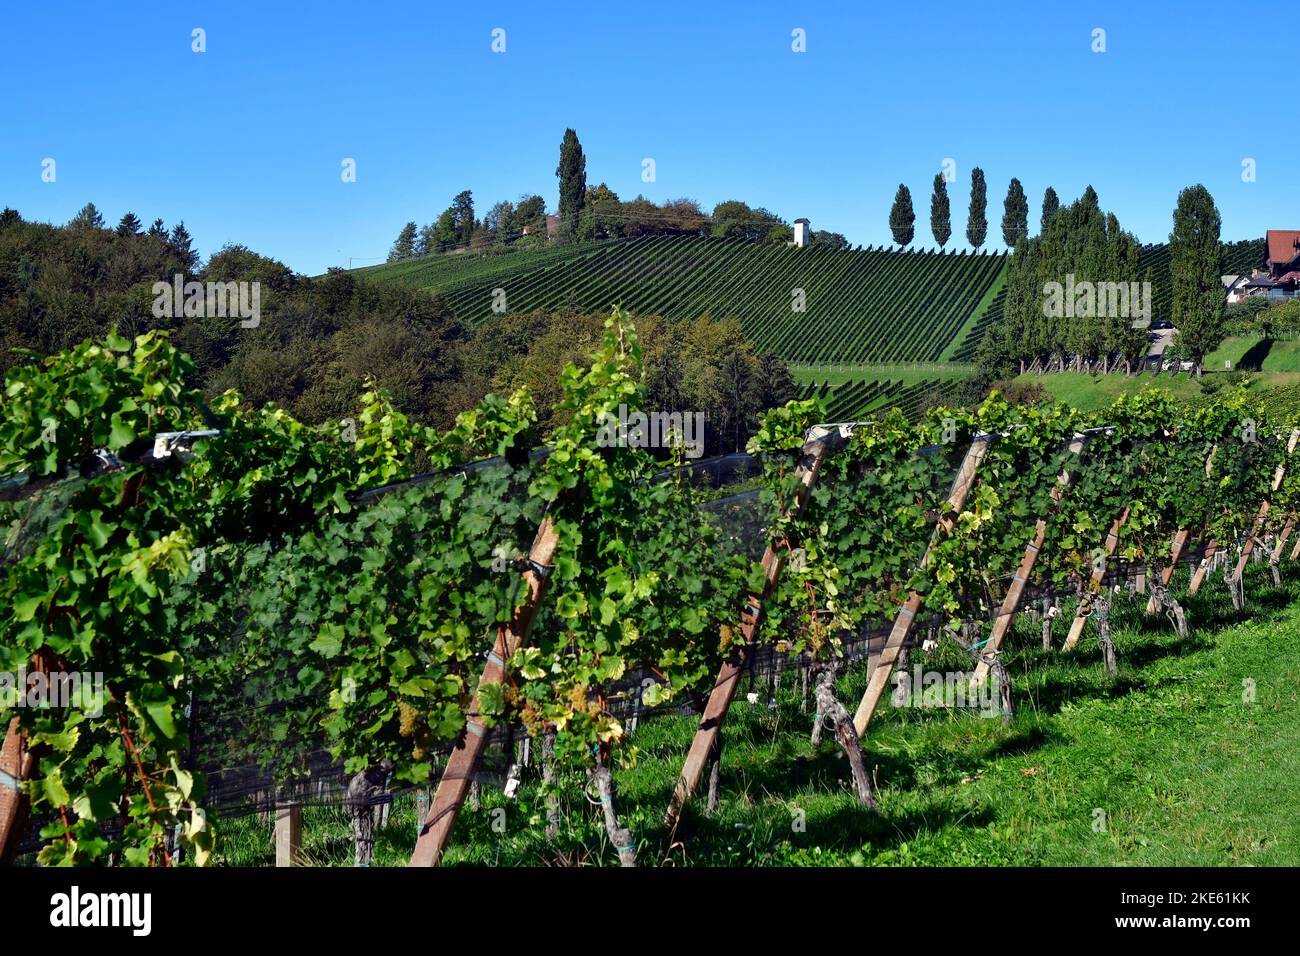 Austria, vineyards on the steep slopes of the Sulm Valley located on the Styrian wine route, the hilly landscape is also known as the Tuscany of Austr Stock Photo